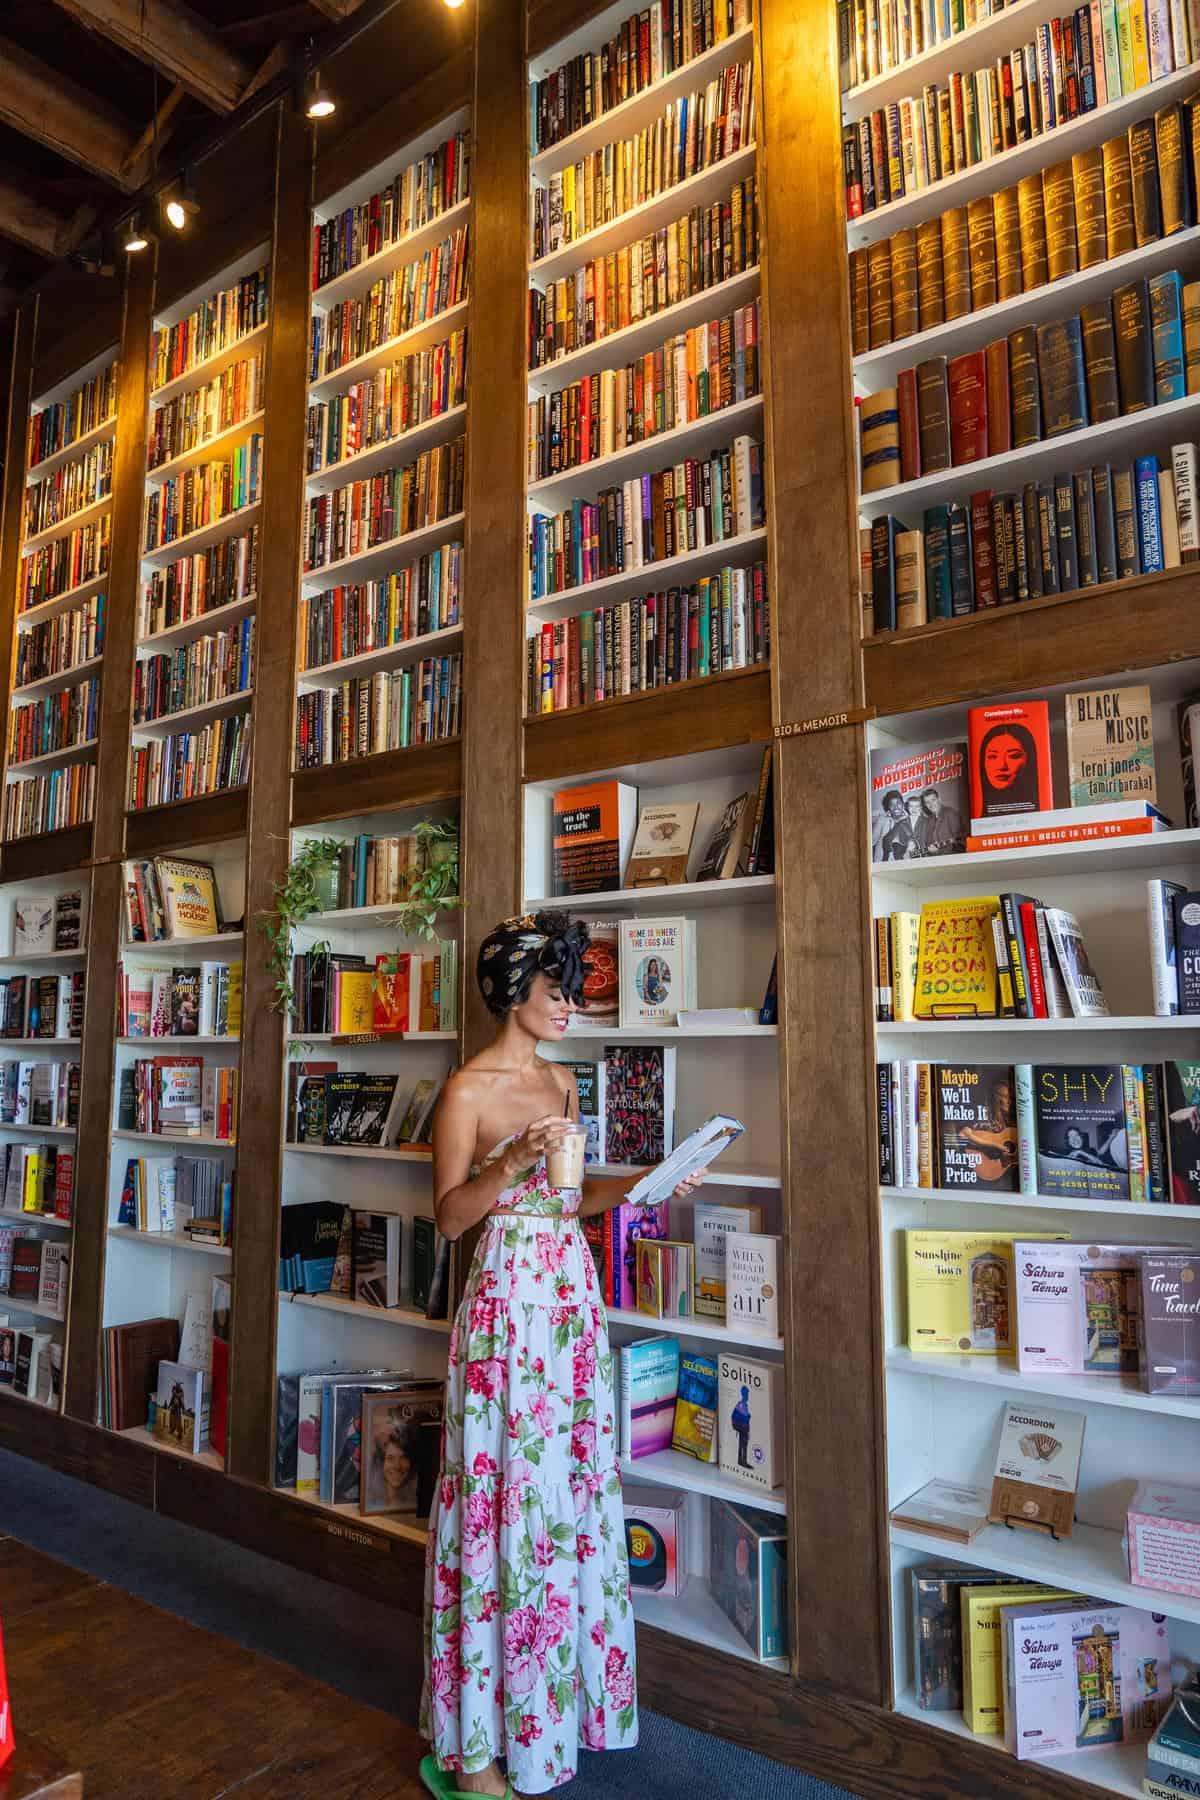 Woman in floral dress standing in front of bookshelf